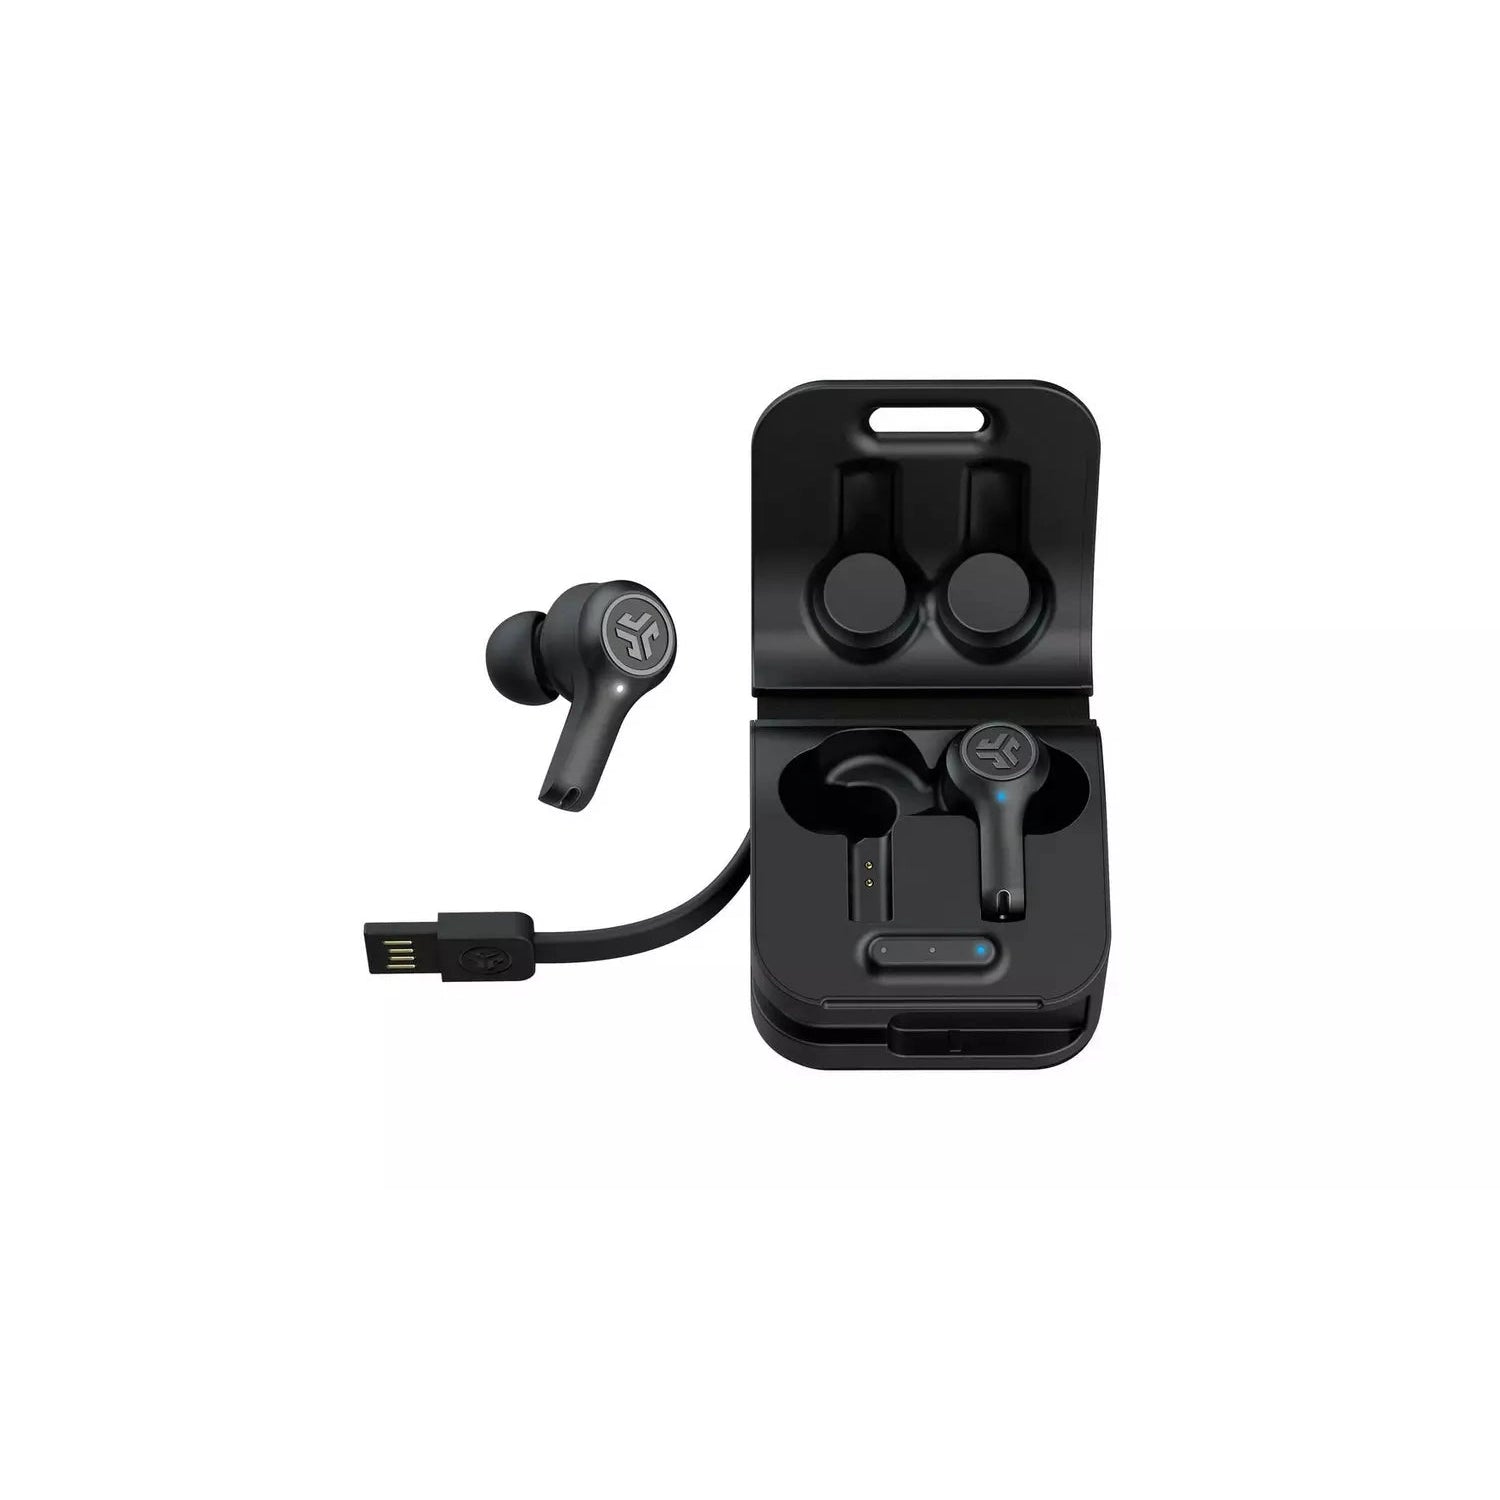 JLab Epic Air ANC In-Ear True Wireless Earbuds - Black - Excellent Condition